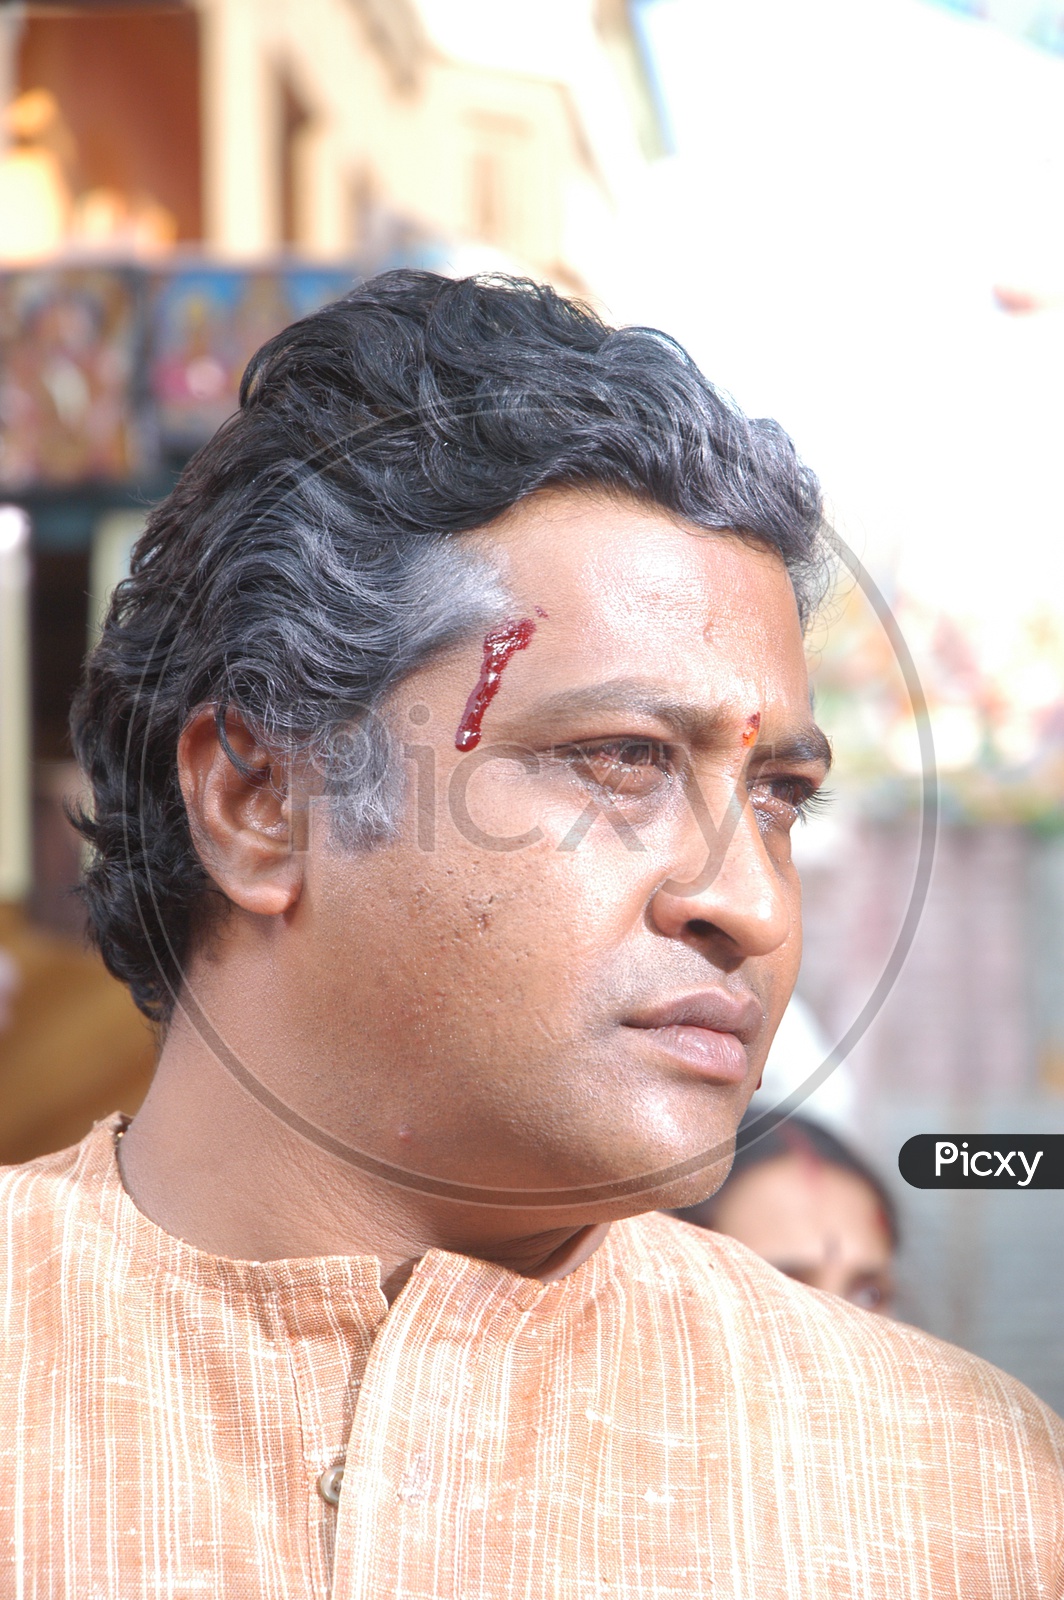 Indian Man With Blood Stains on Face